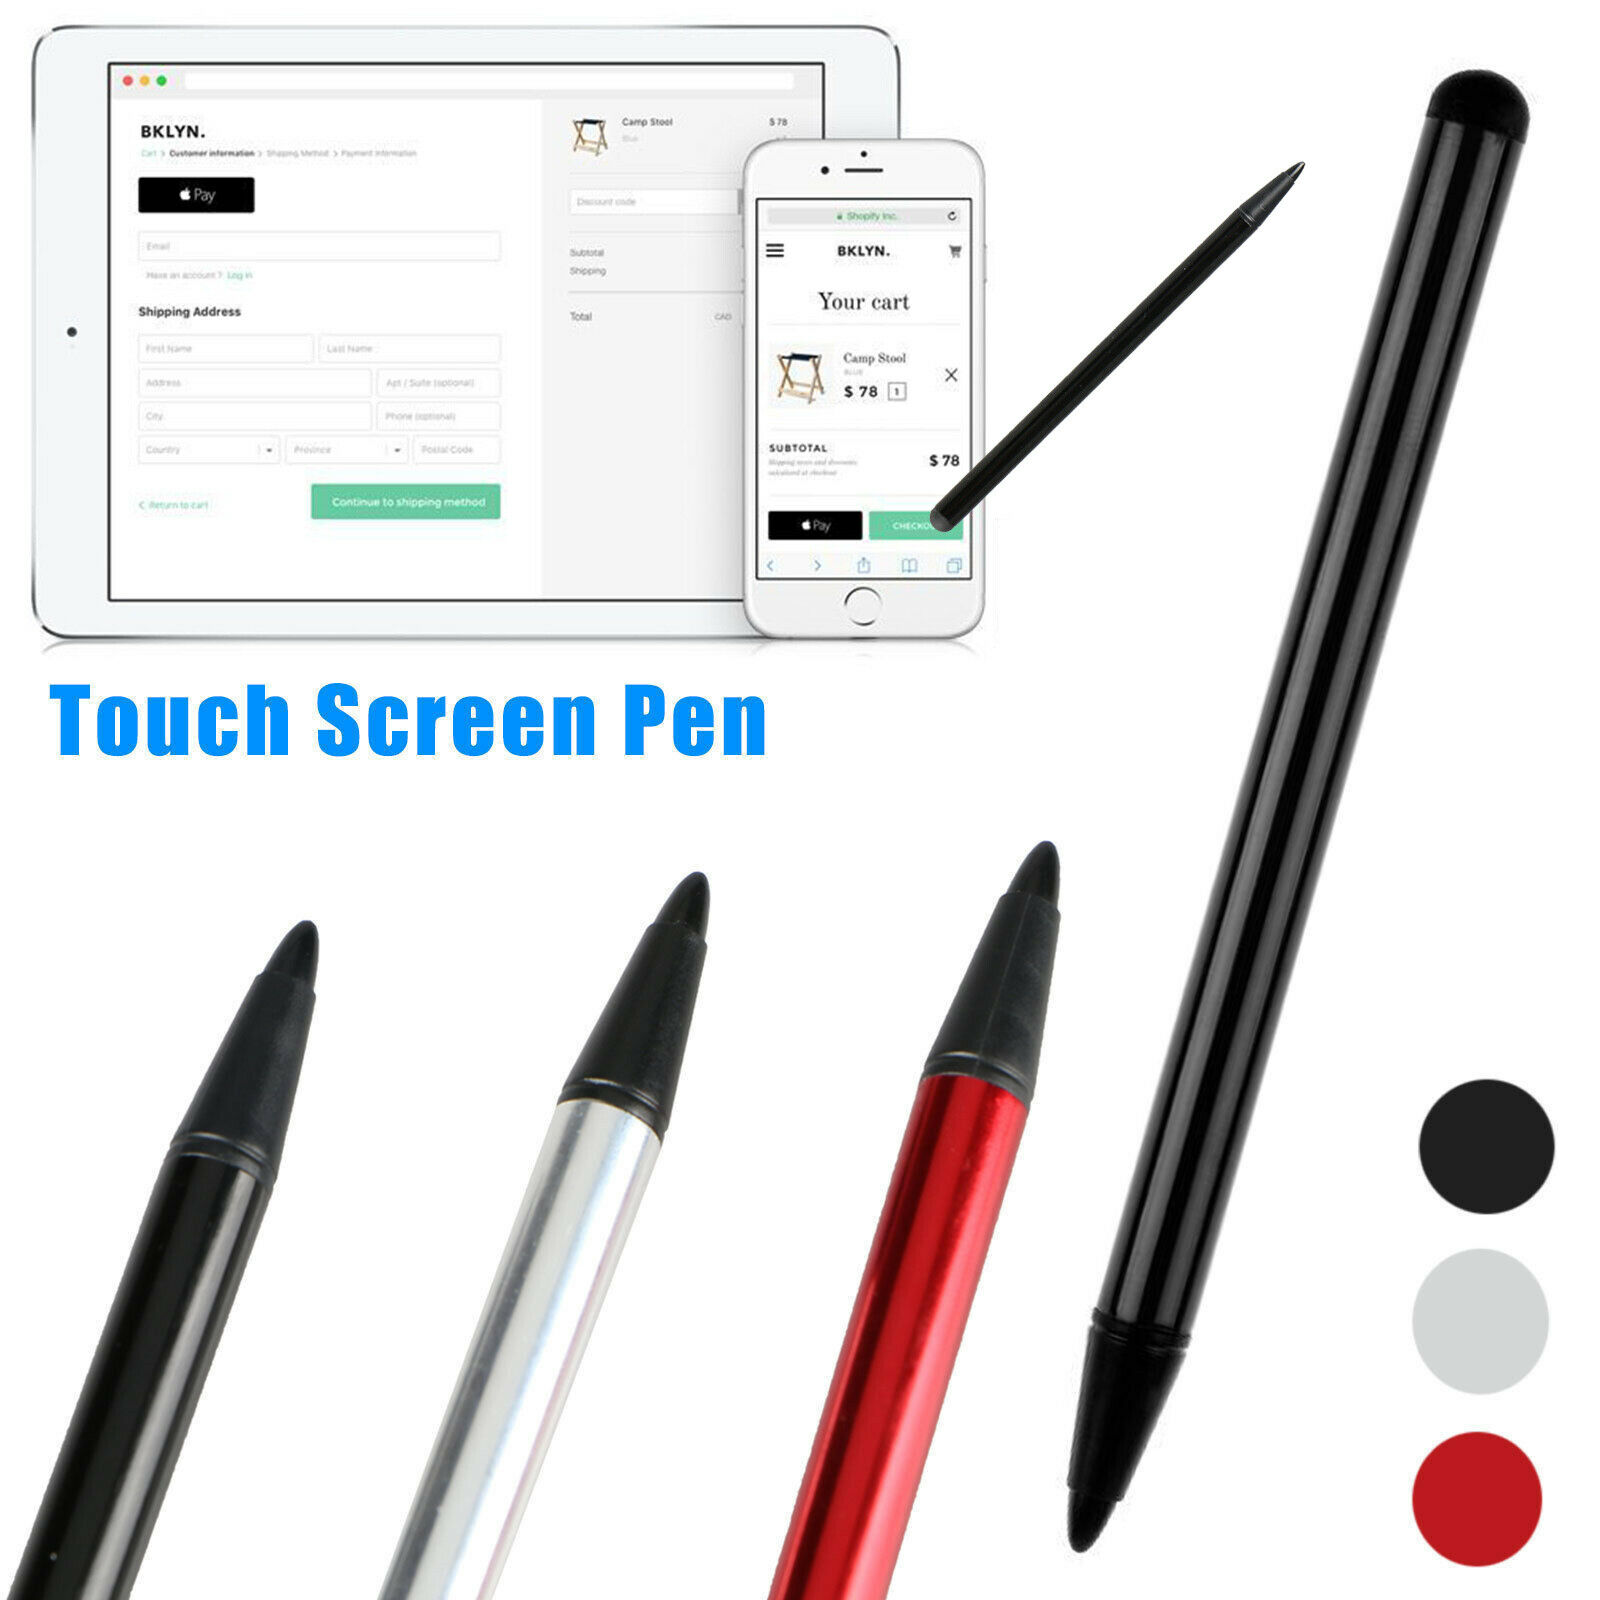 2 in 1 Touch Screen Pen Stylus Universal For iPhone iPad Samsung Tablet Phone PC